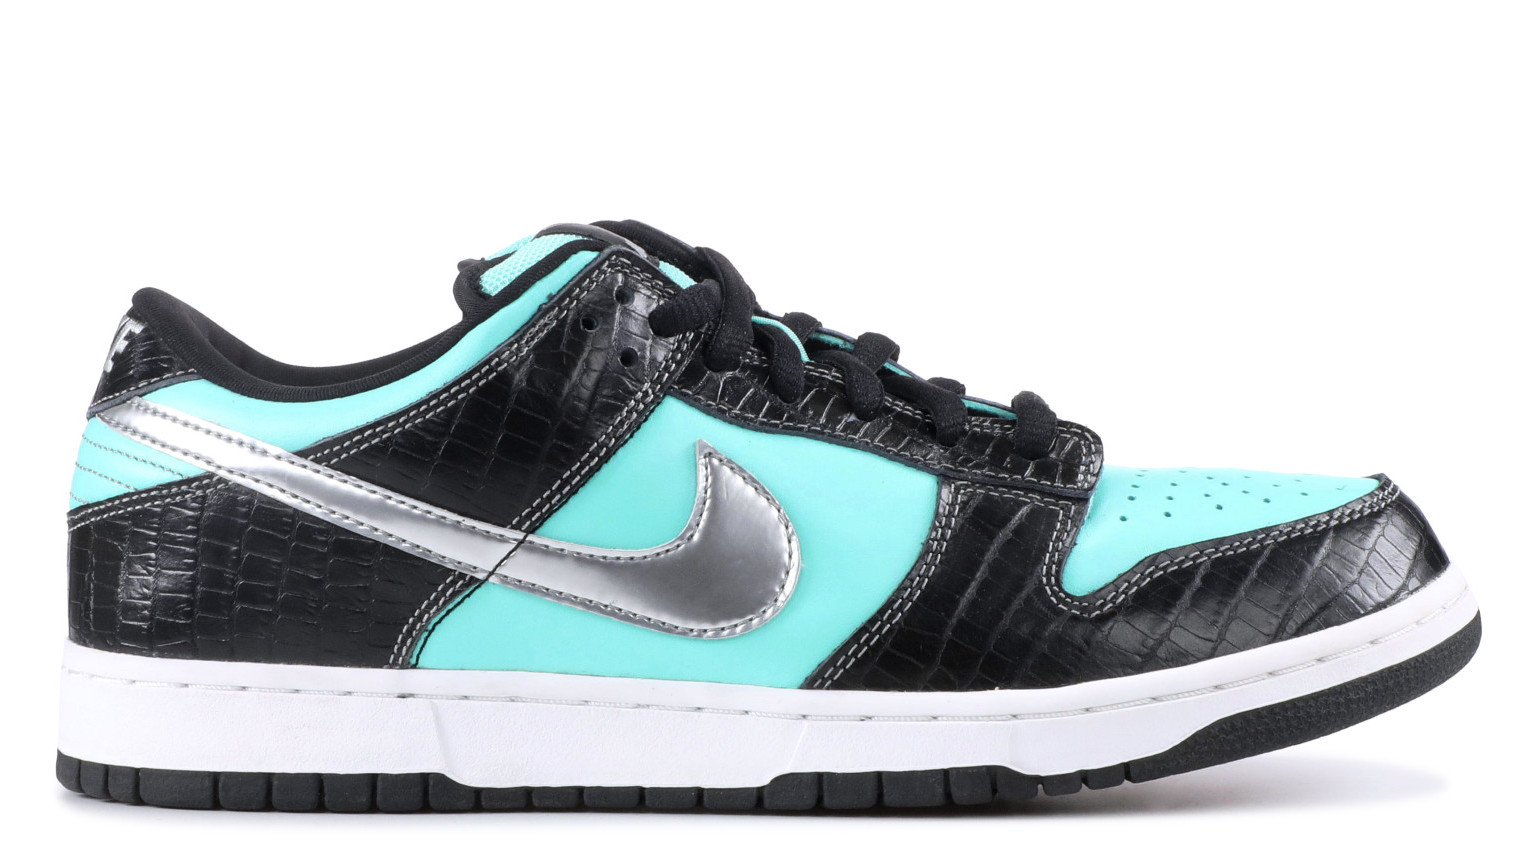 How the Tiffany Became One of the Most Hyped Sneakers | Sole Collector